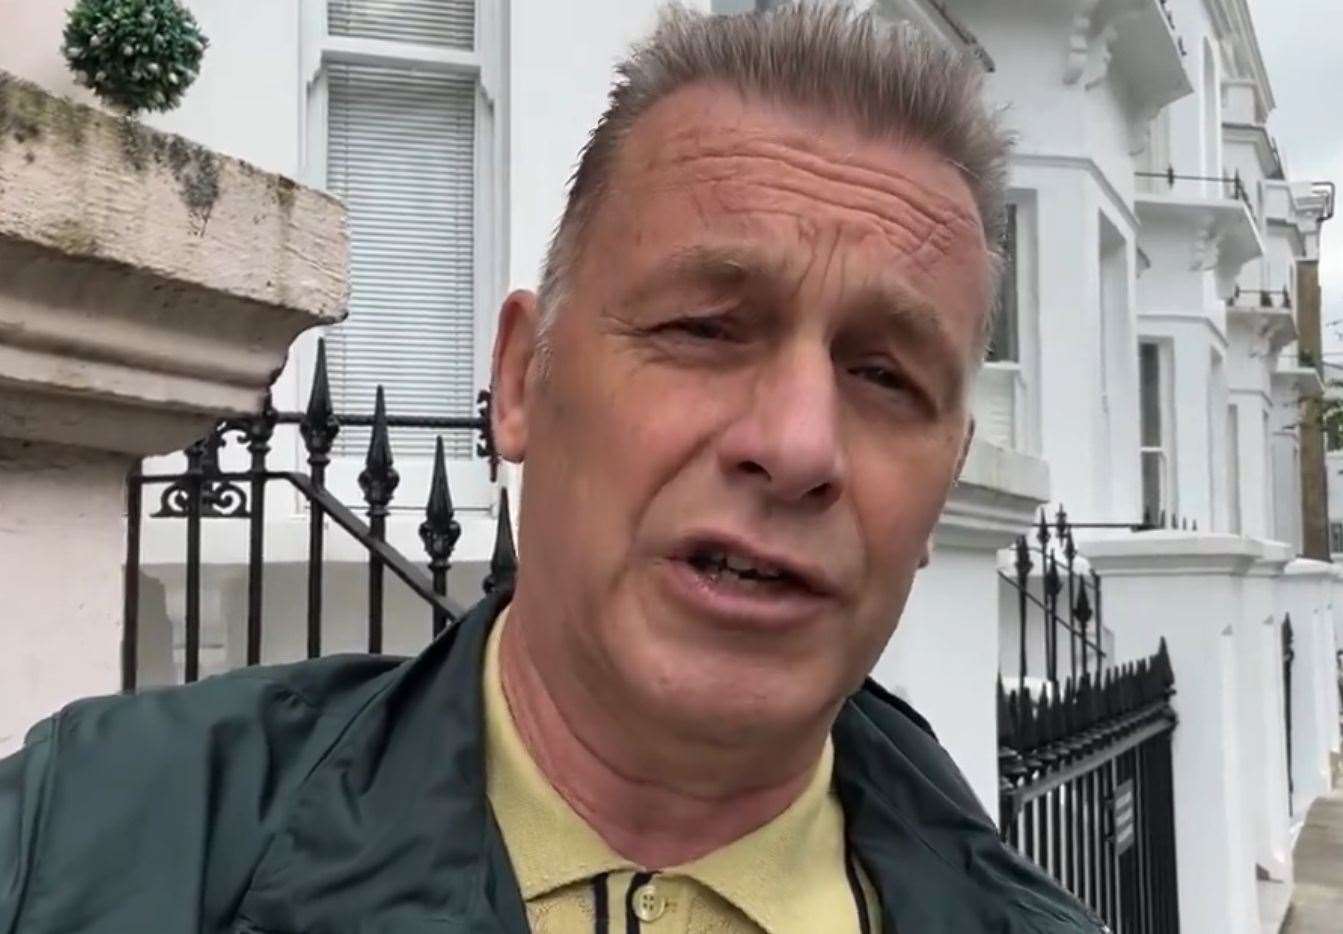 Chris Packham is urging people to join a march against the University of Kent's plans for 2,000 new homes in Blean, near Canterbury